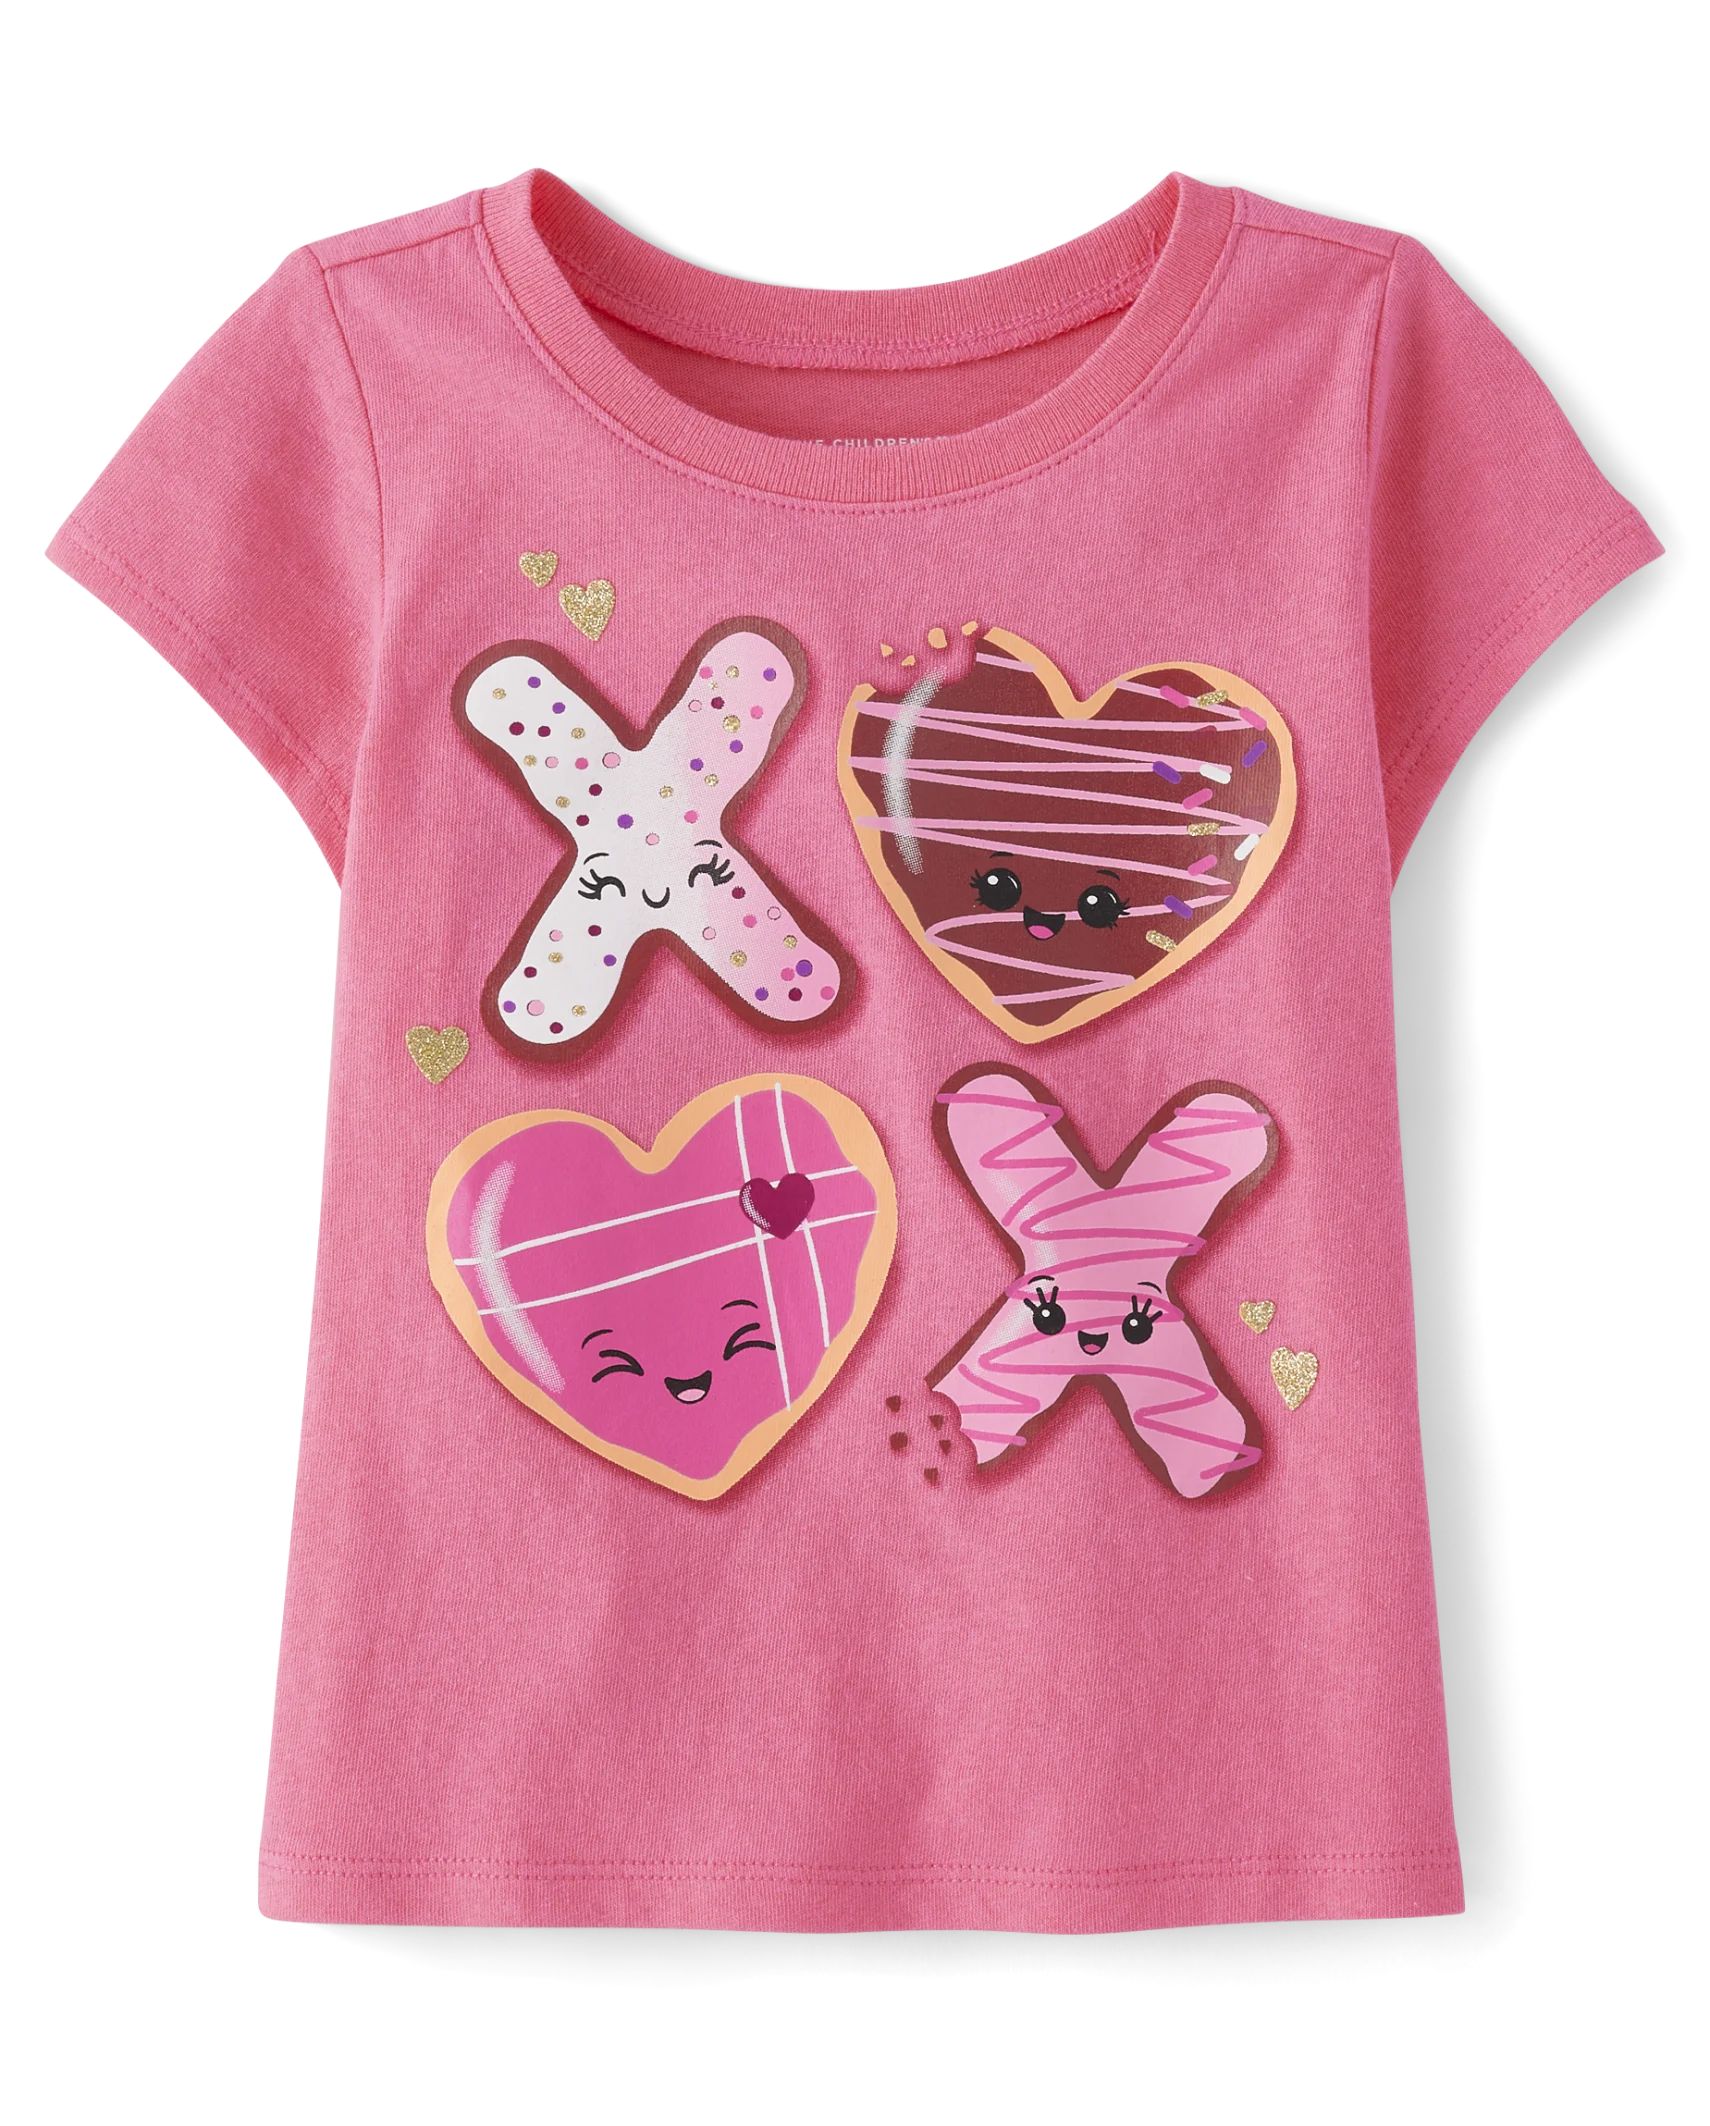 Baby And Toddler Girls XOXO Graphic Tee - ultra pink | The Children's Place